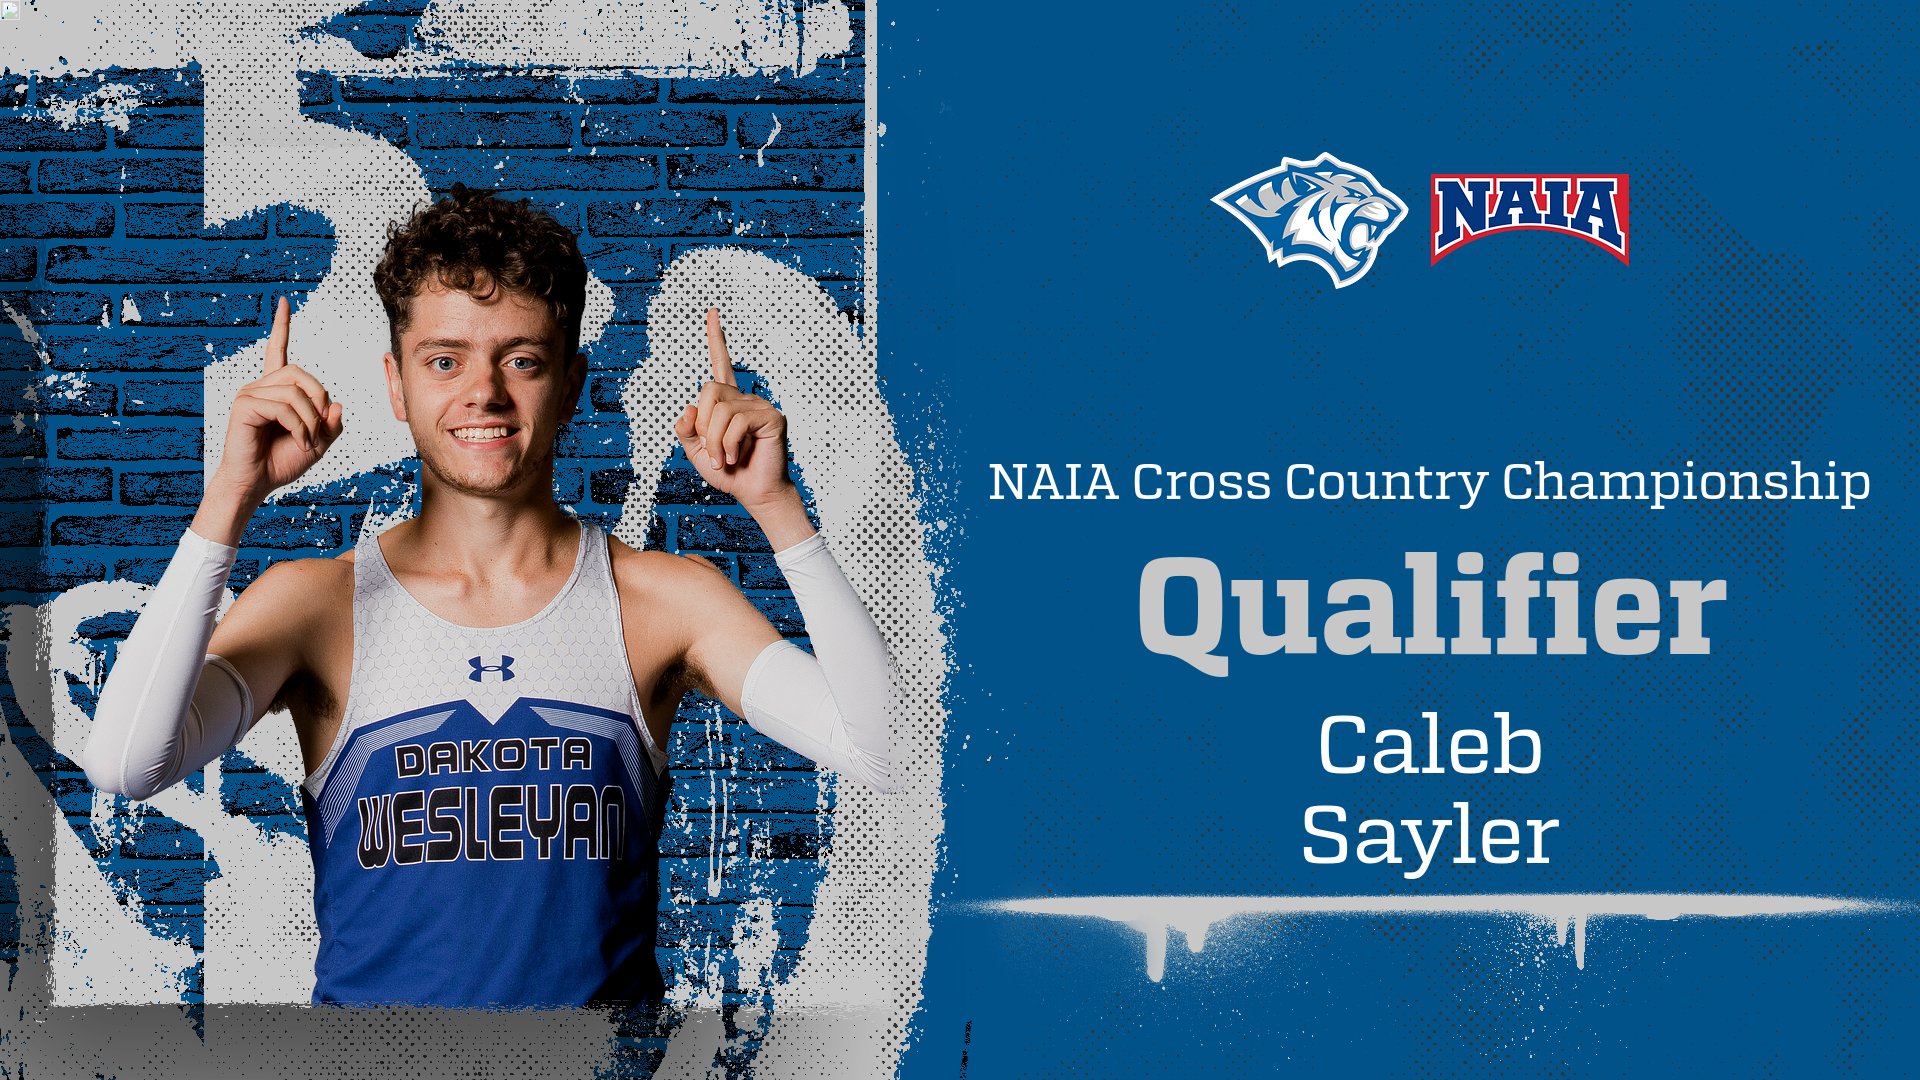 SAYLER QUALIFIES FOR NAIA CROSS COUNTRY CHAMPIONSHIP